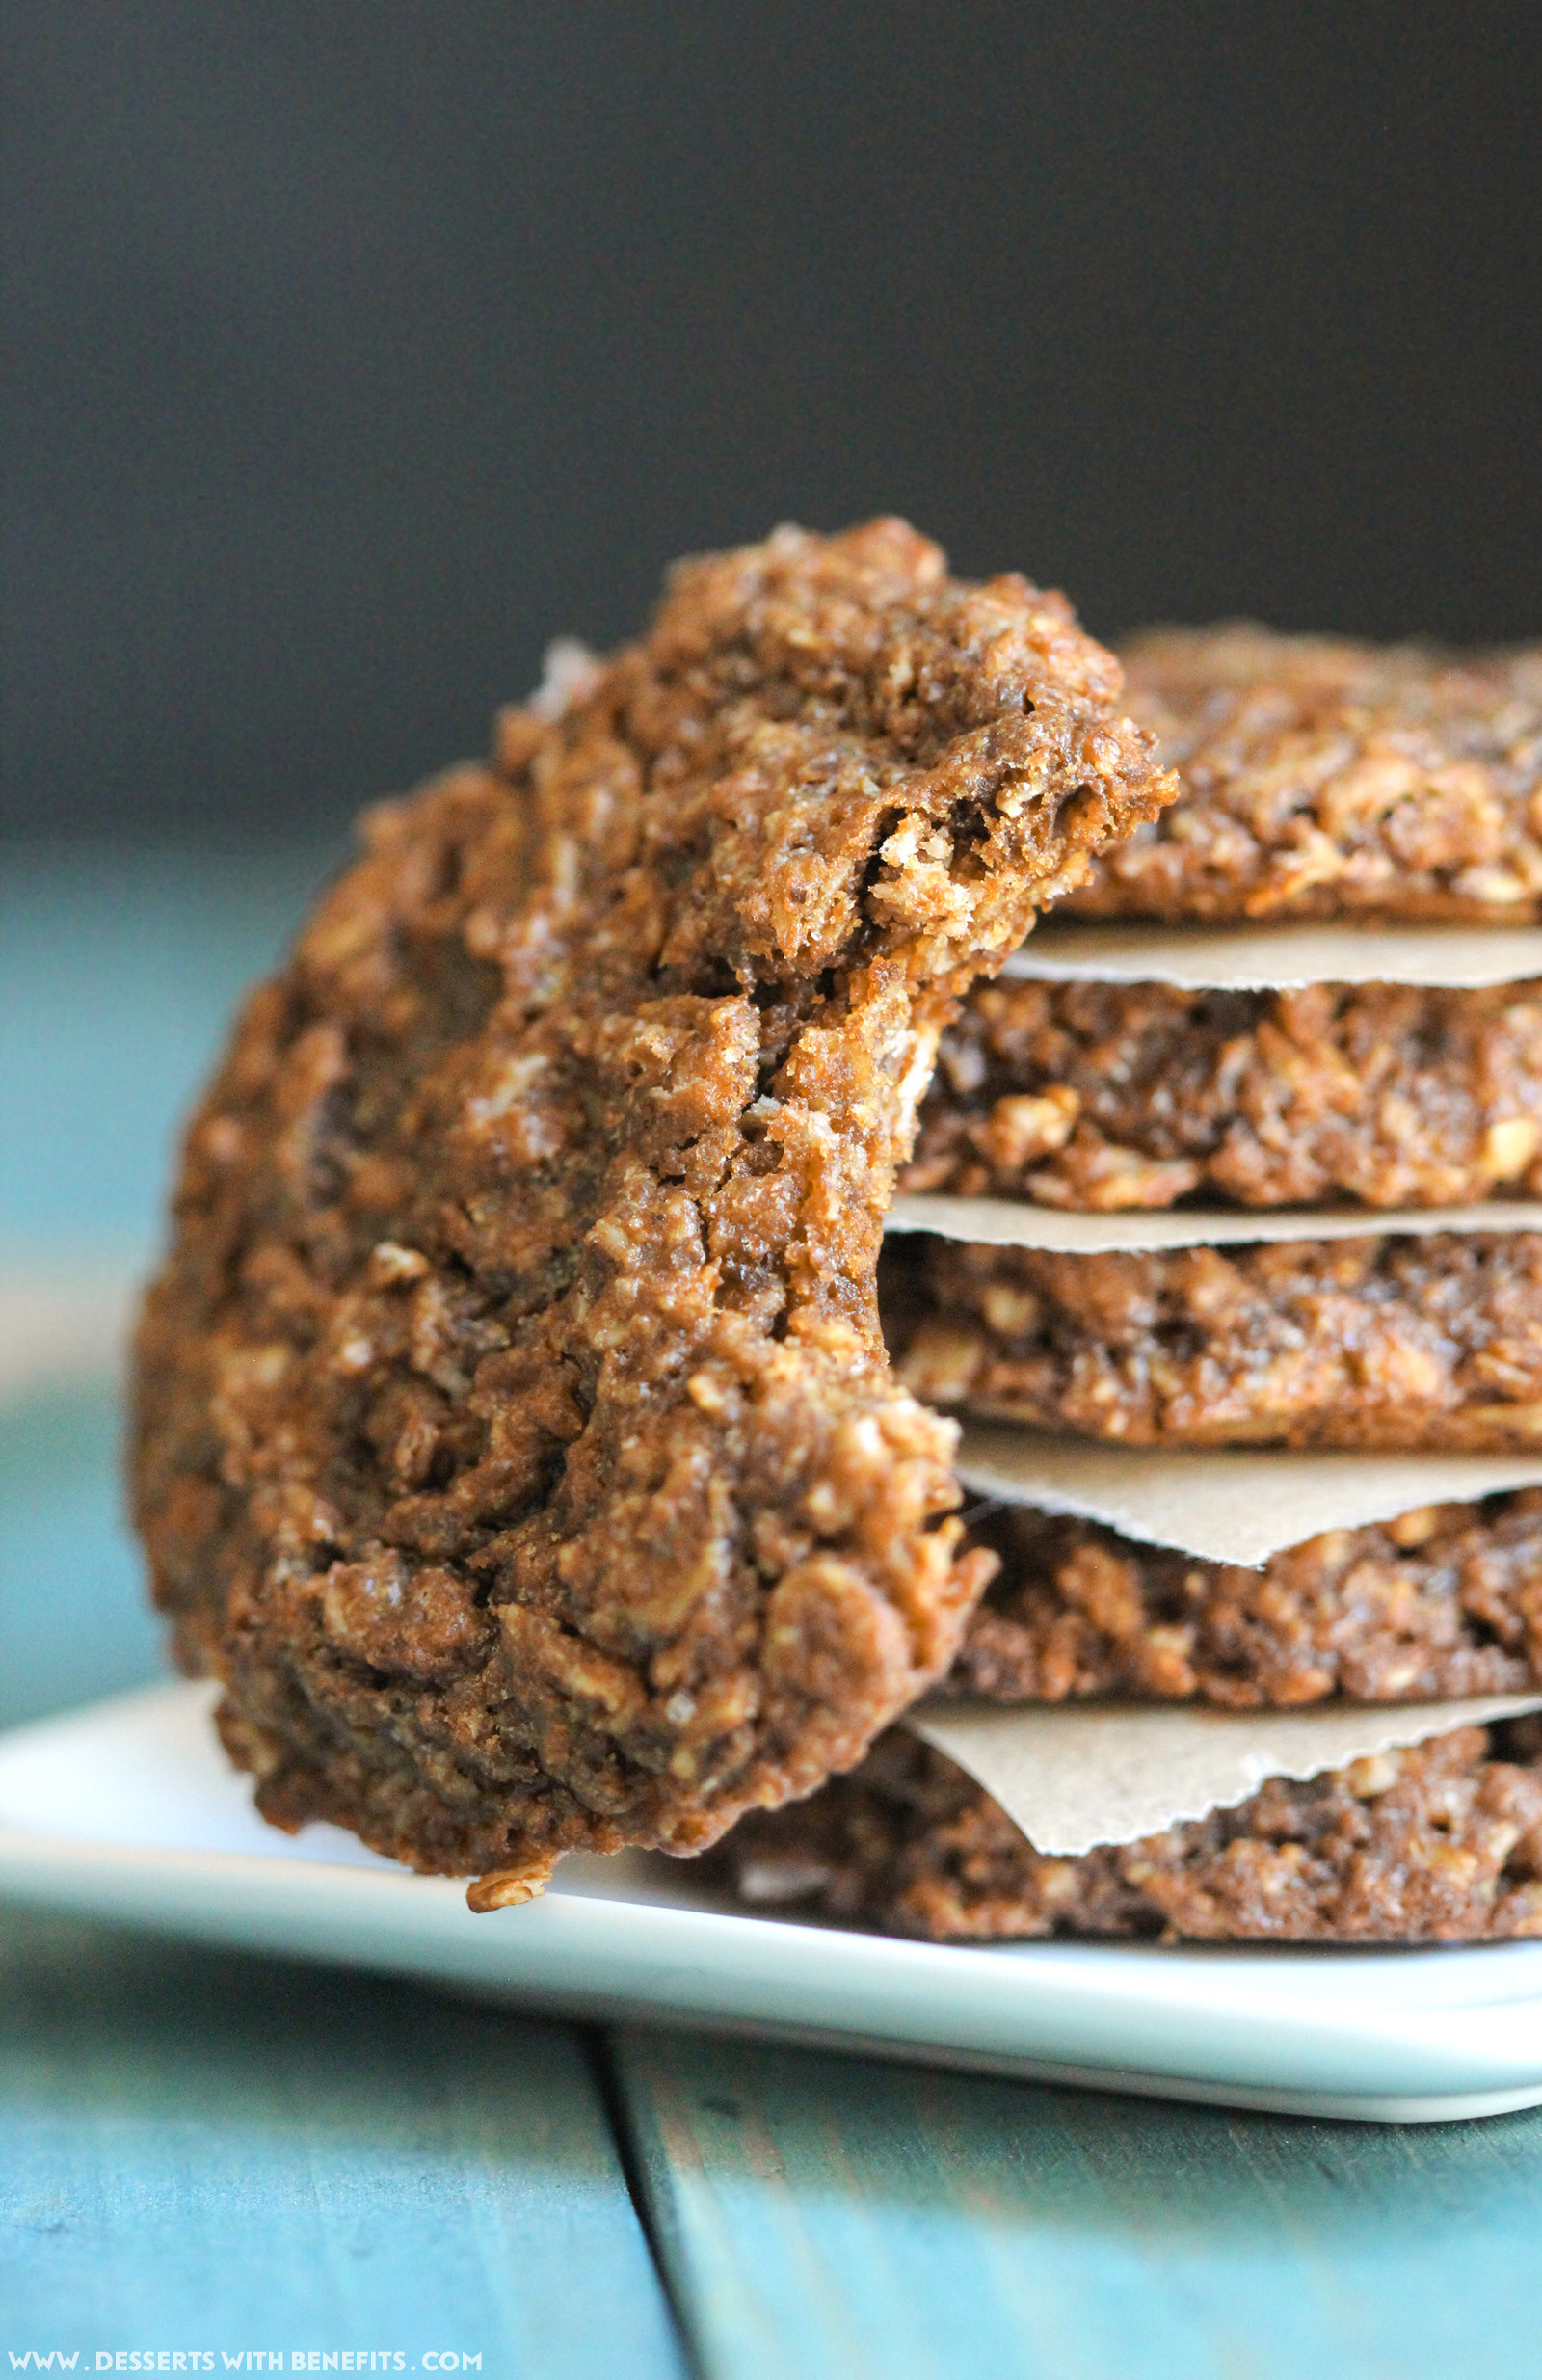 Healthy Oatmeal Peanut Butter Cookies
 Healthy Chewy Peanut Butter Oatmeal Cookies recipe gluten